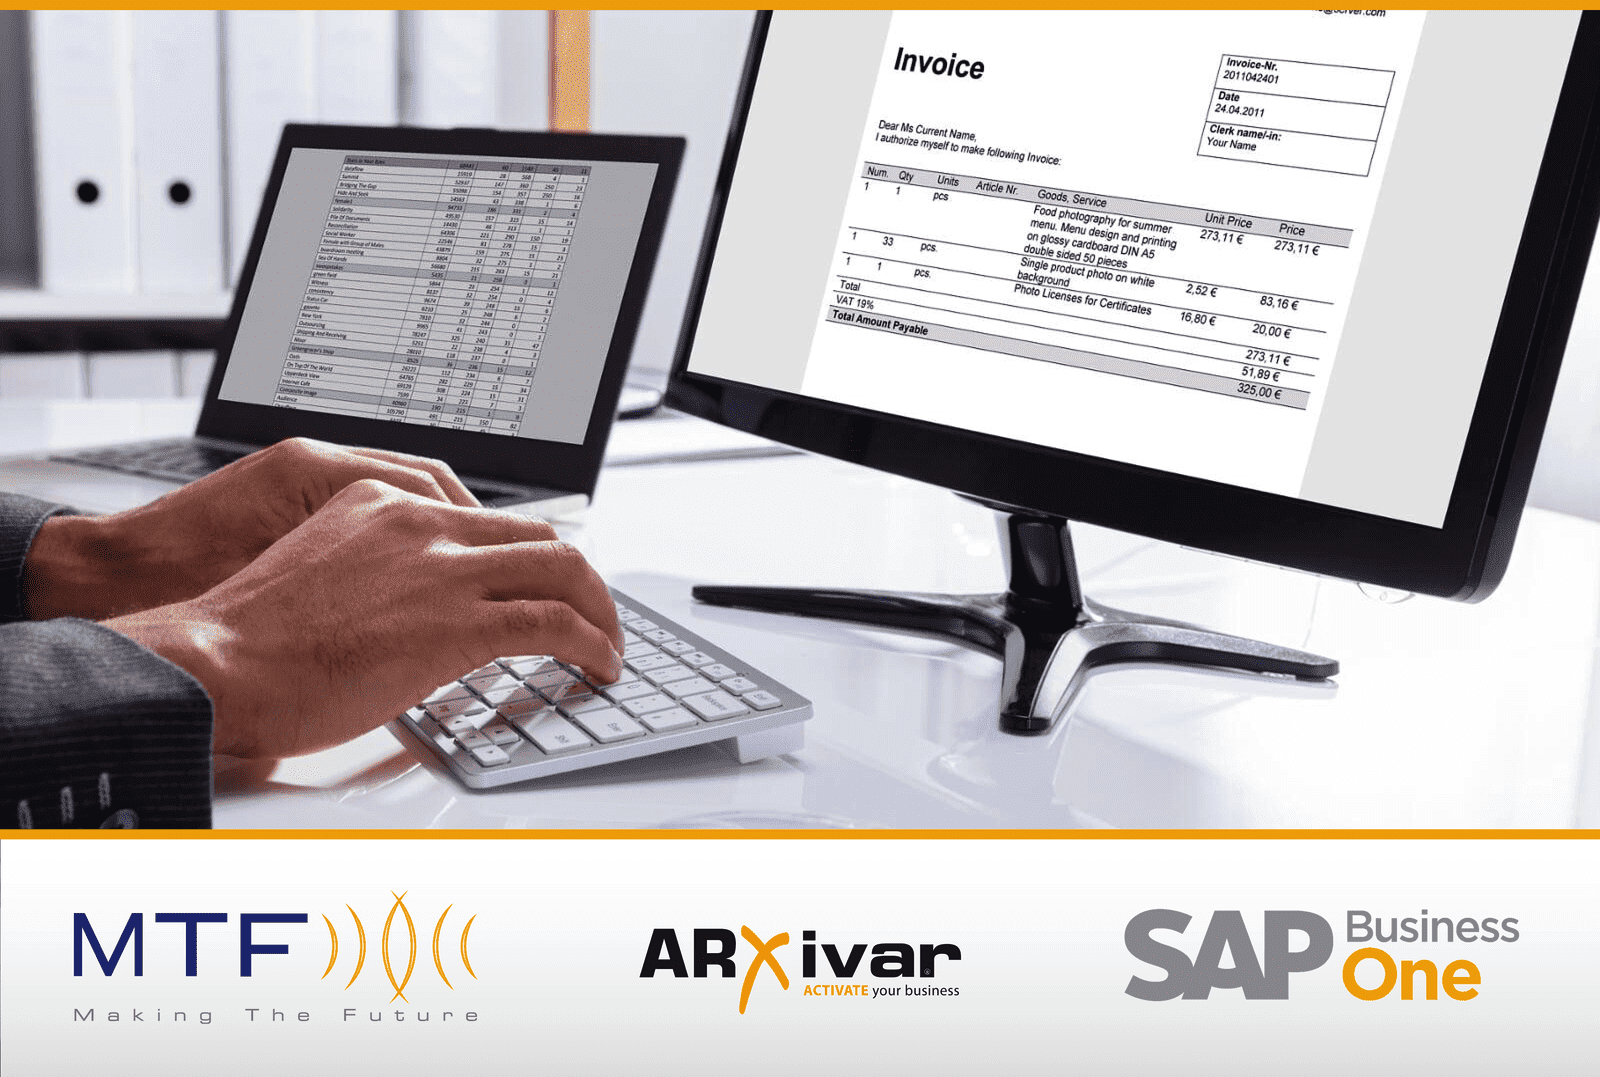 Go "paperless" with ARXivar and SAP